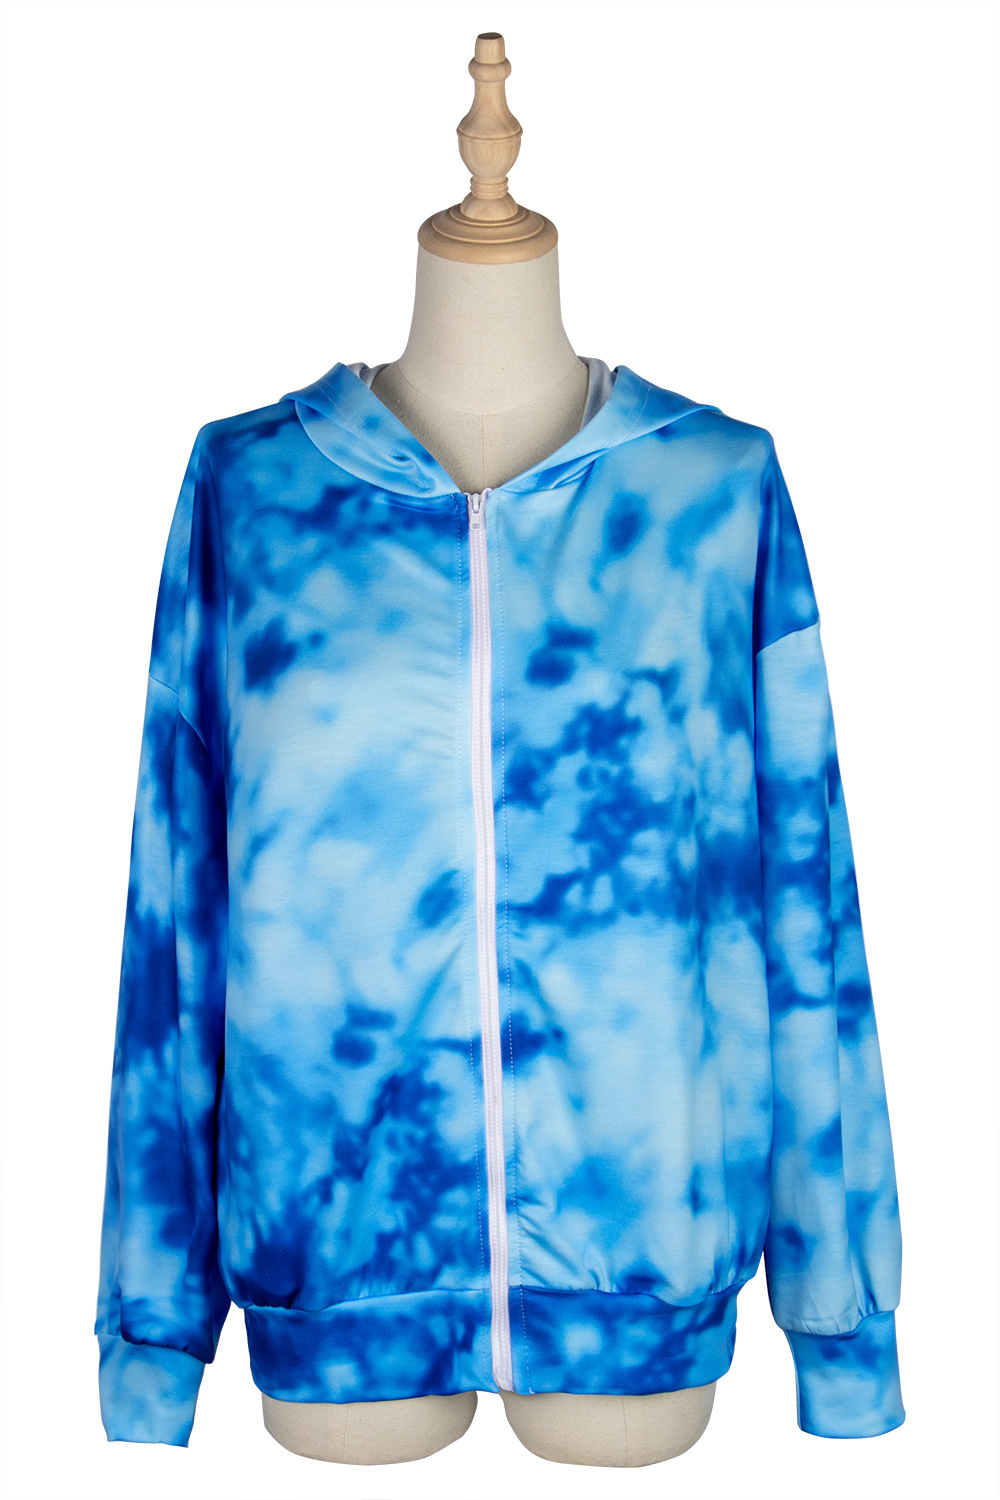 Fashion Digital Printing Zipper Tie-dye Hooded Long Sleeves Sweater Jacket For Women display picture 5